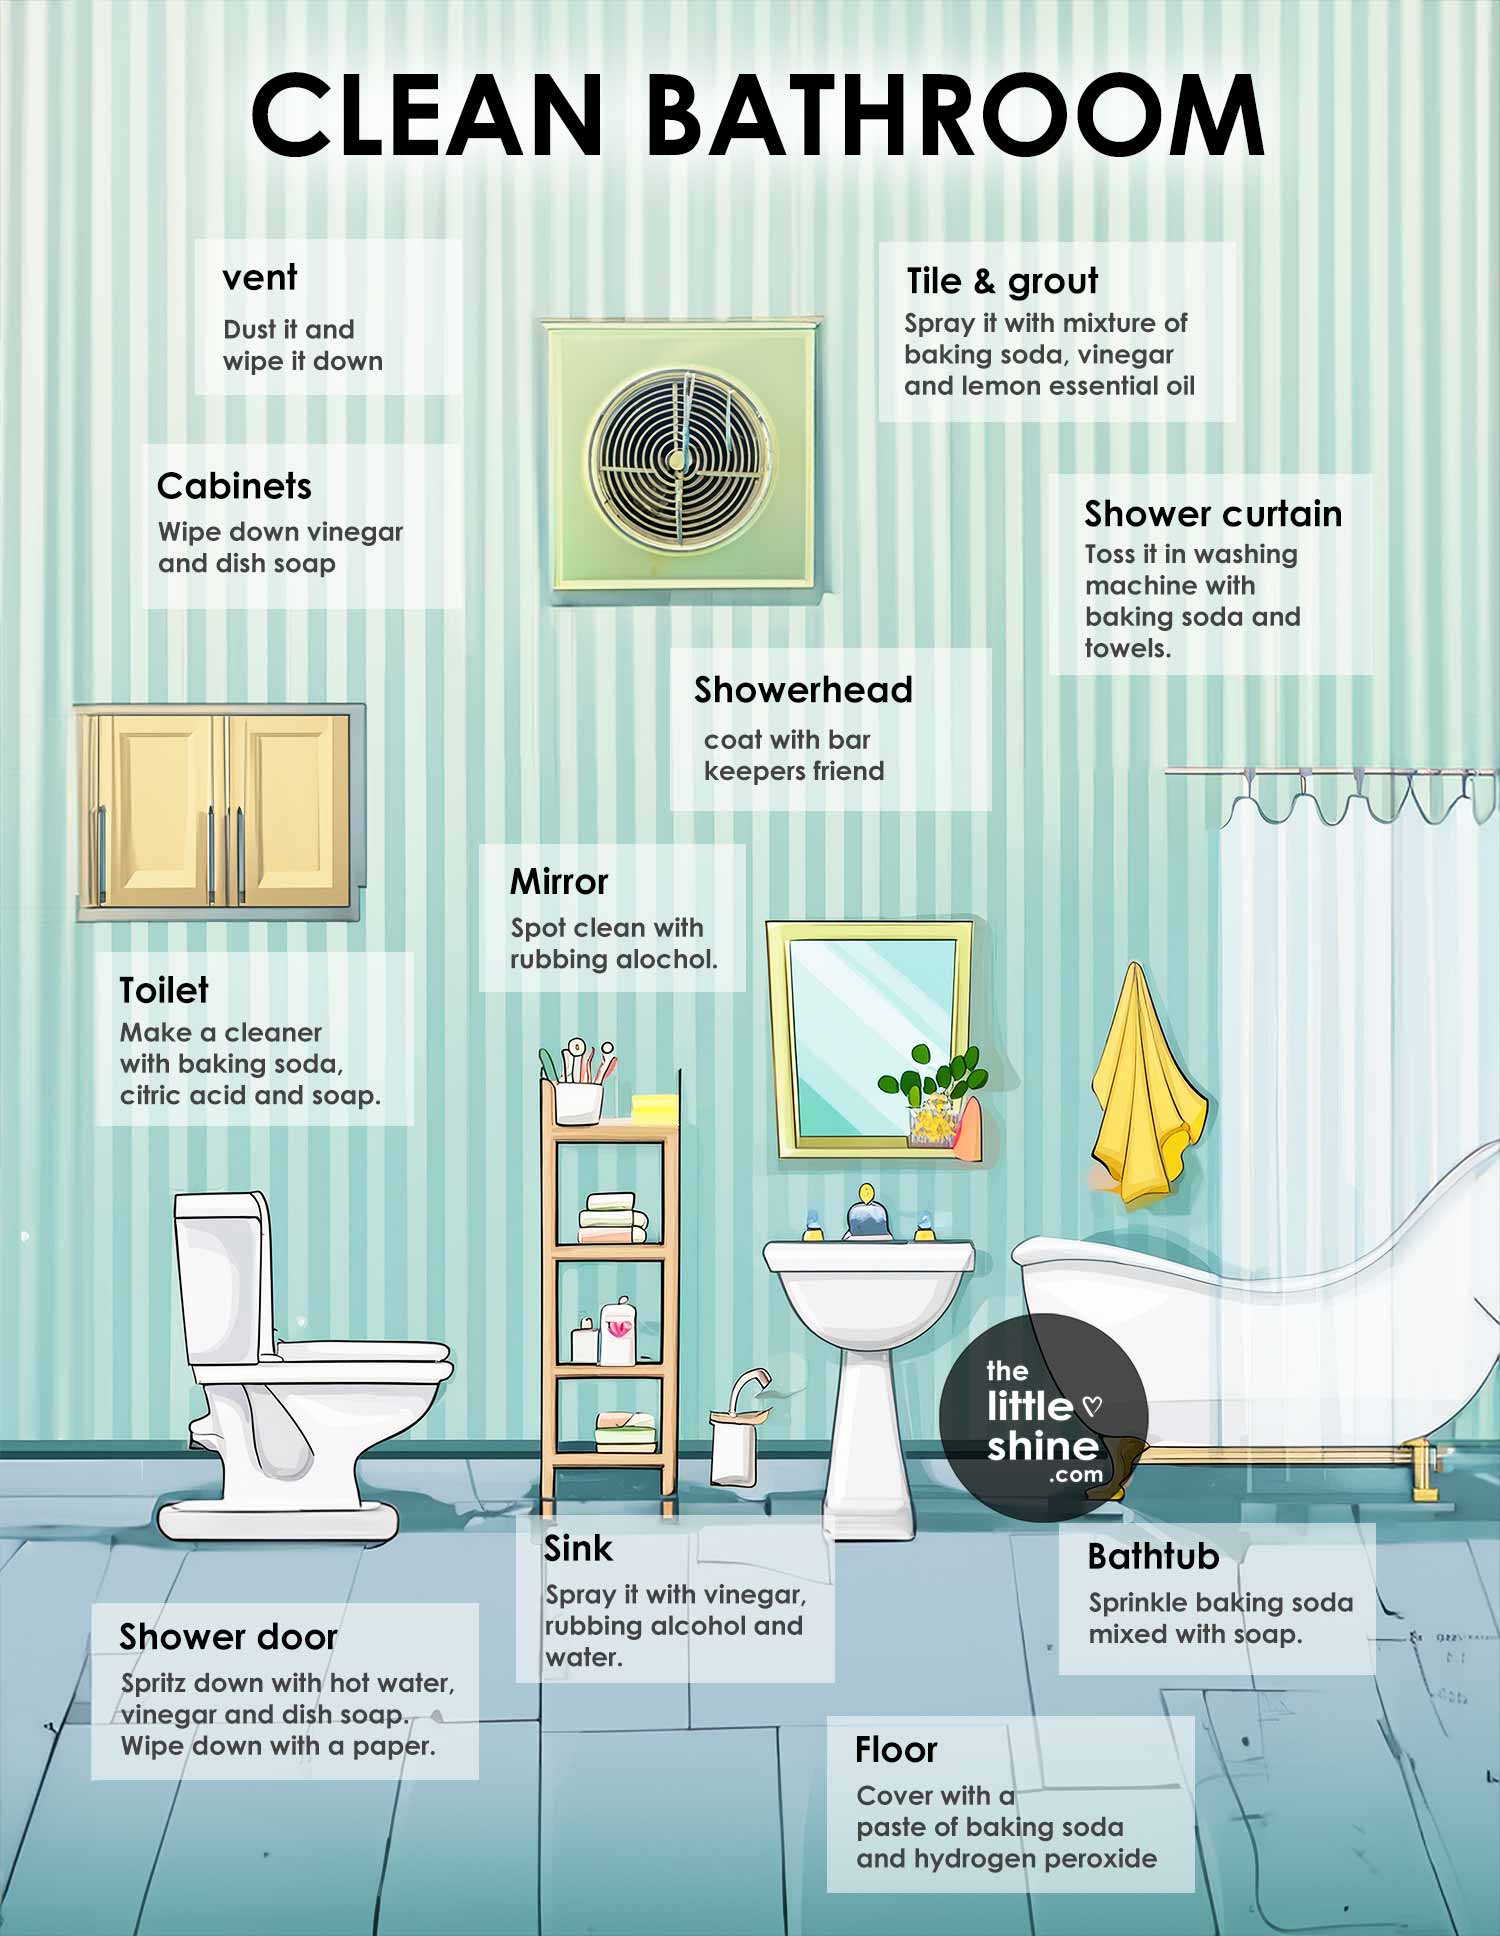 Best ways TO DEEP CLEAN THE BATHROOM FROM TOP TO BOTTOM